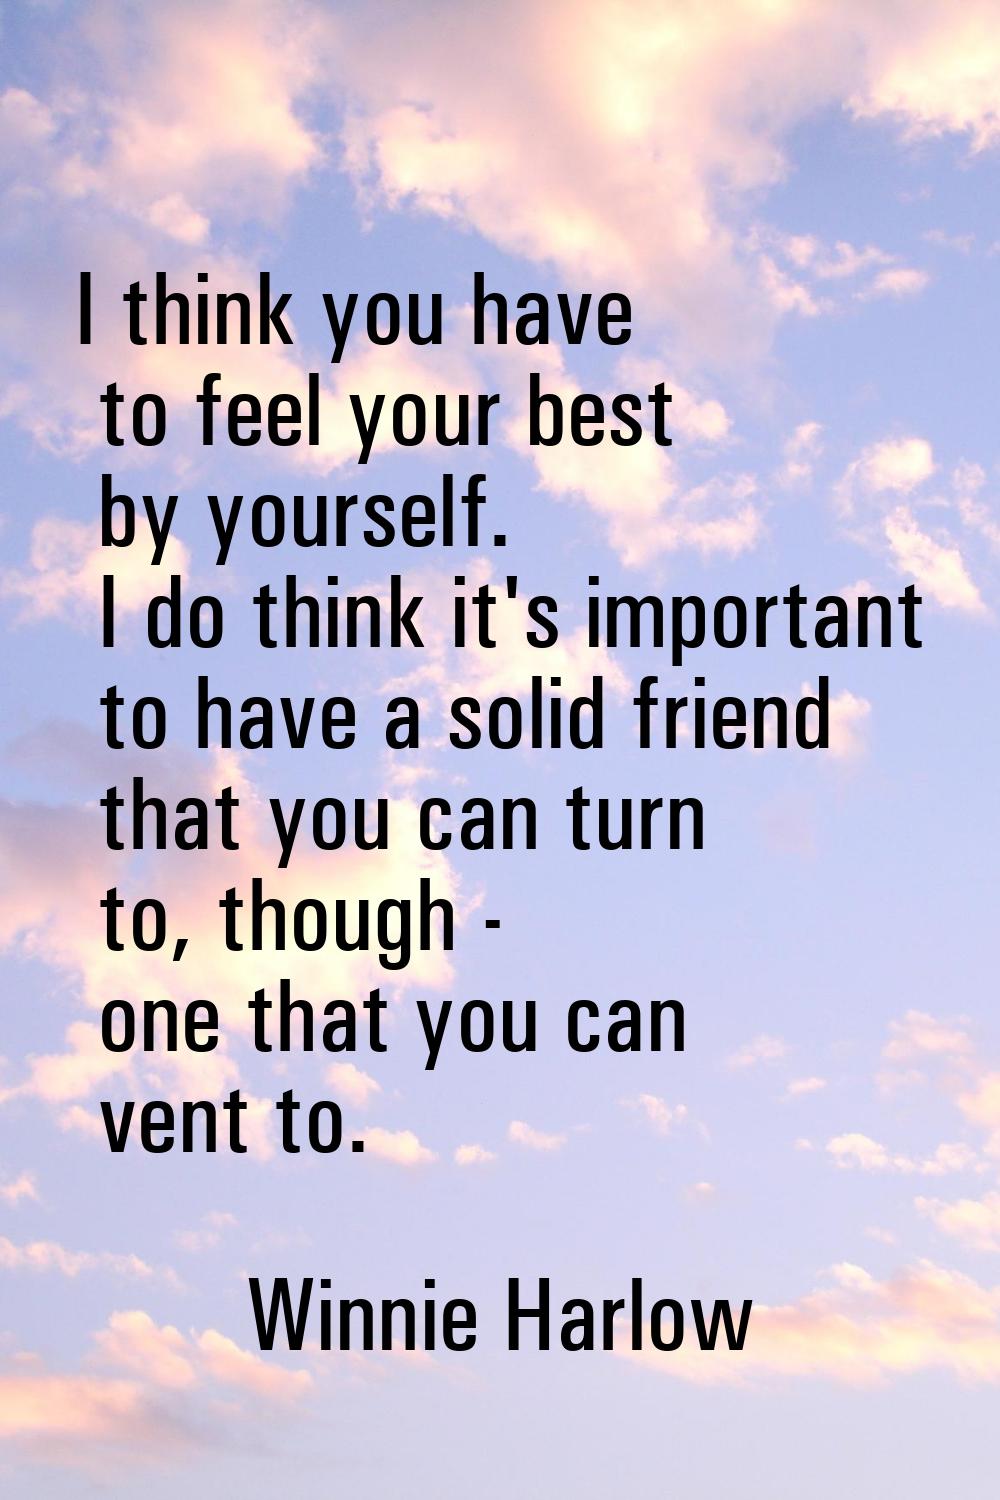 I think you have to feel your best by yourself. I do think it's important to have a solid friend th